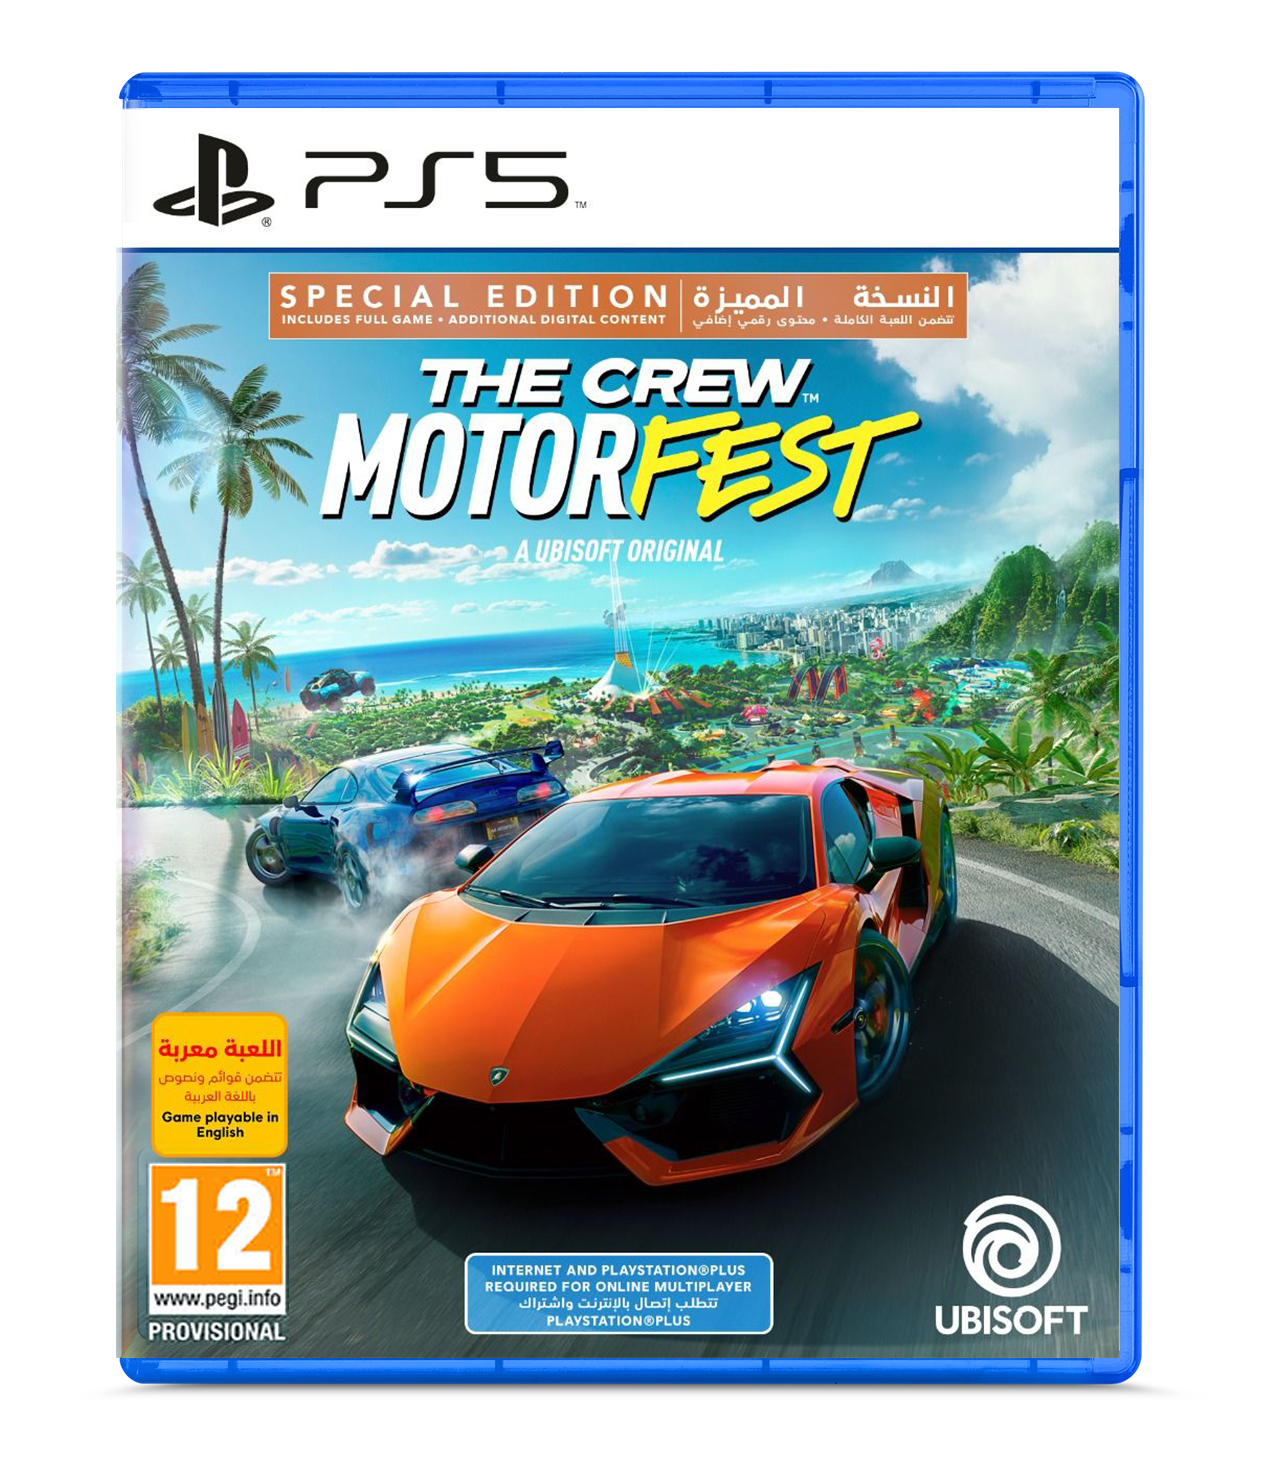 The history of The Crew ahead of Motorfest game release